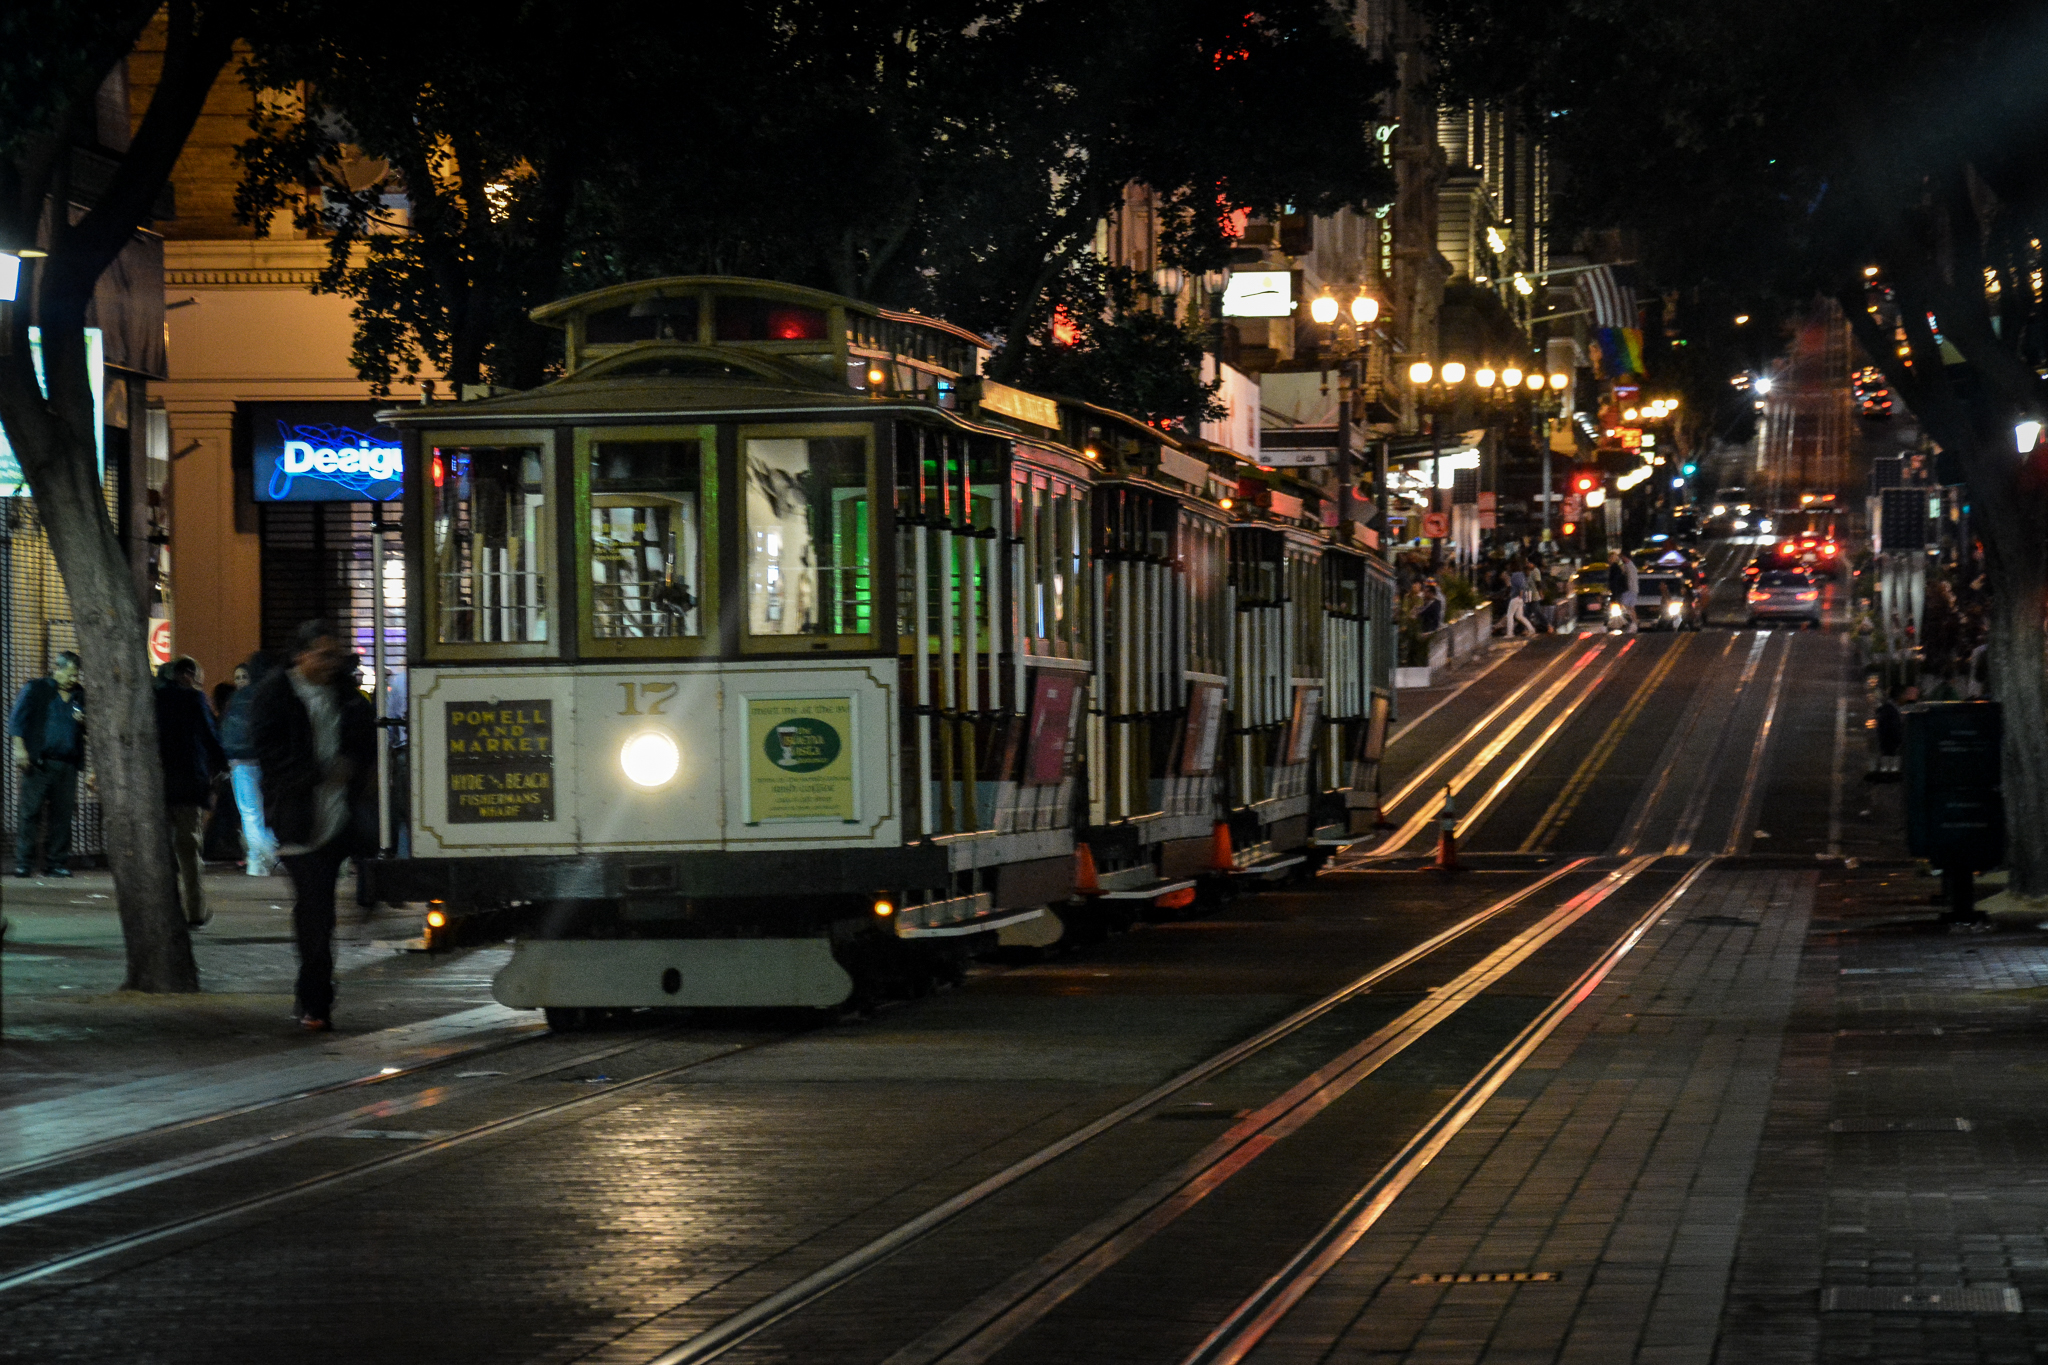 Cable Car on the streets of San Francisco at night